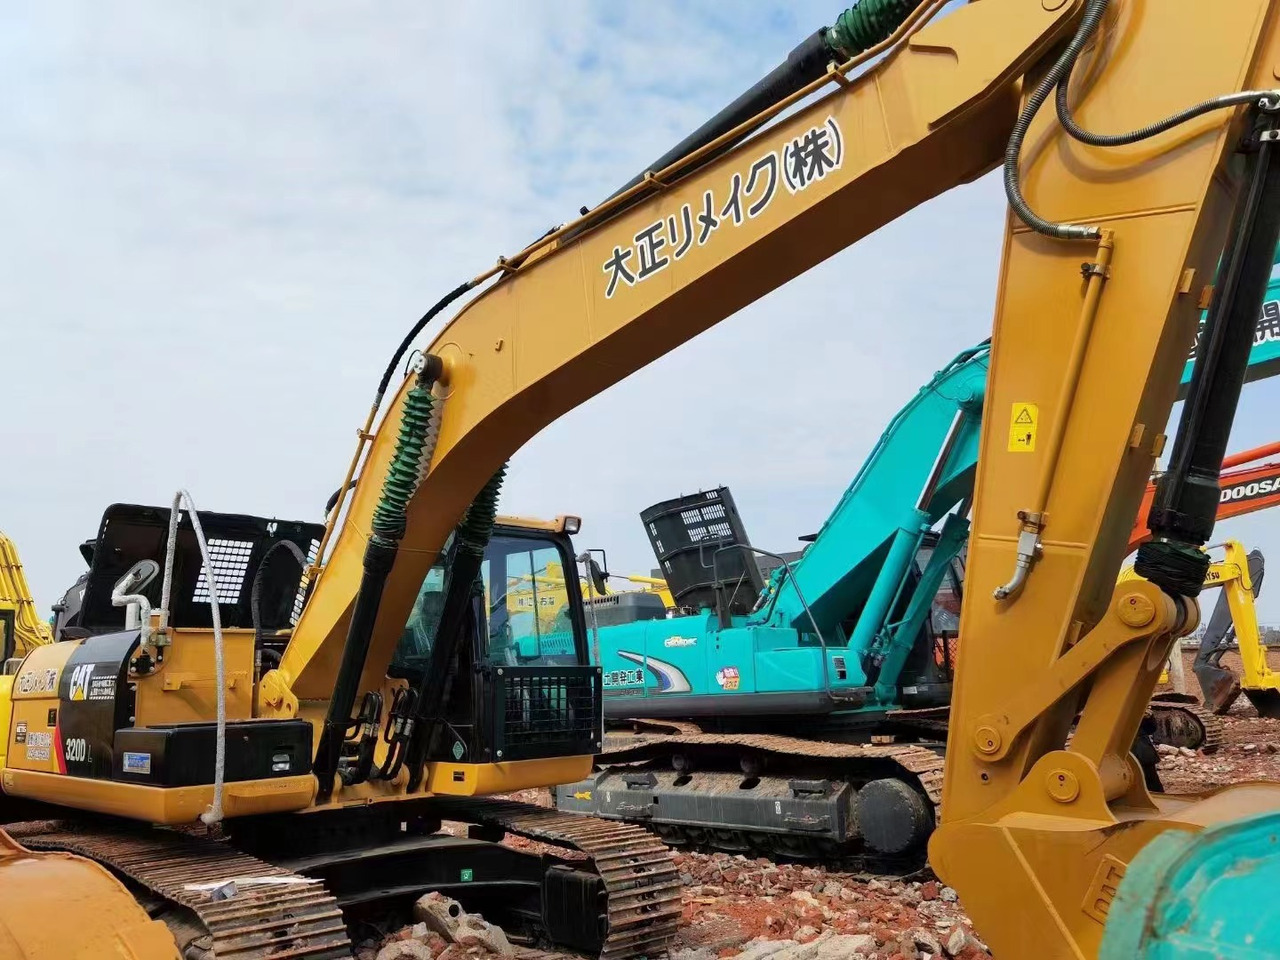 Bager gusjeničar 20 ton Large used engineering construction machinery  CATERPILLAR 320DL good condition in ready stock on sale: slika Bager gusjeničar 20 ton Large used engineering construction machinery  CATERPILLAR 320DL good condition in ready stock on sale